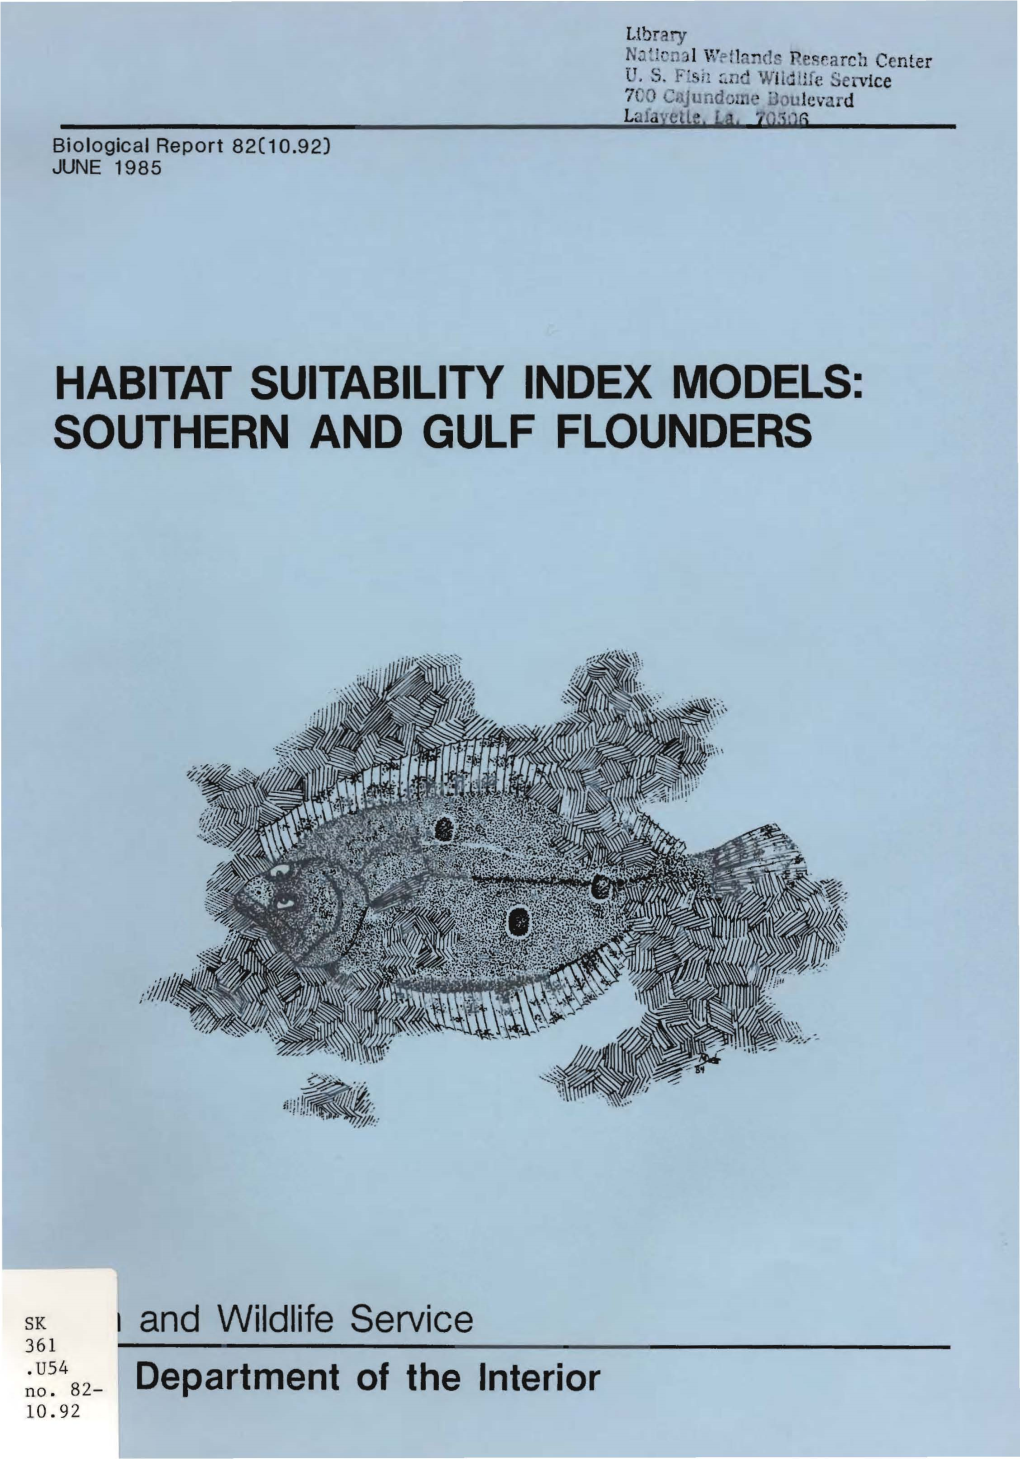 Habitat Suitability Index Models: Southern and Gulf Flounders